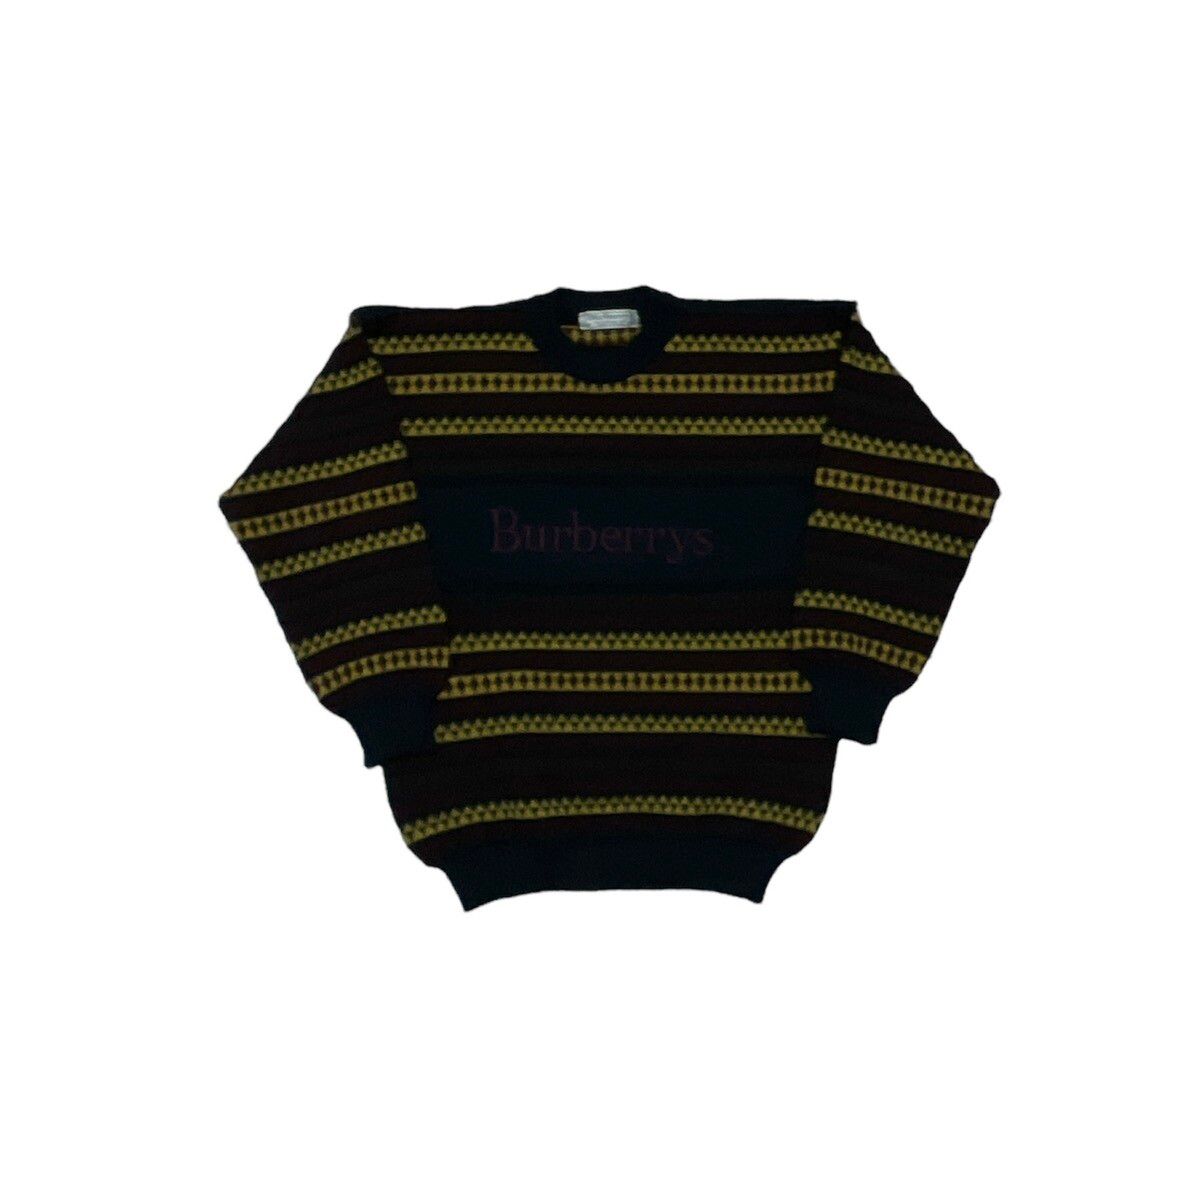 Vintage Burberrys embroidered knit sweater - 1